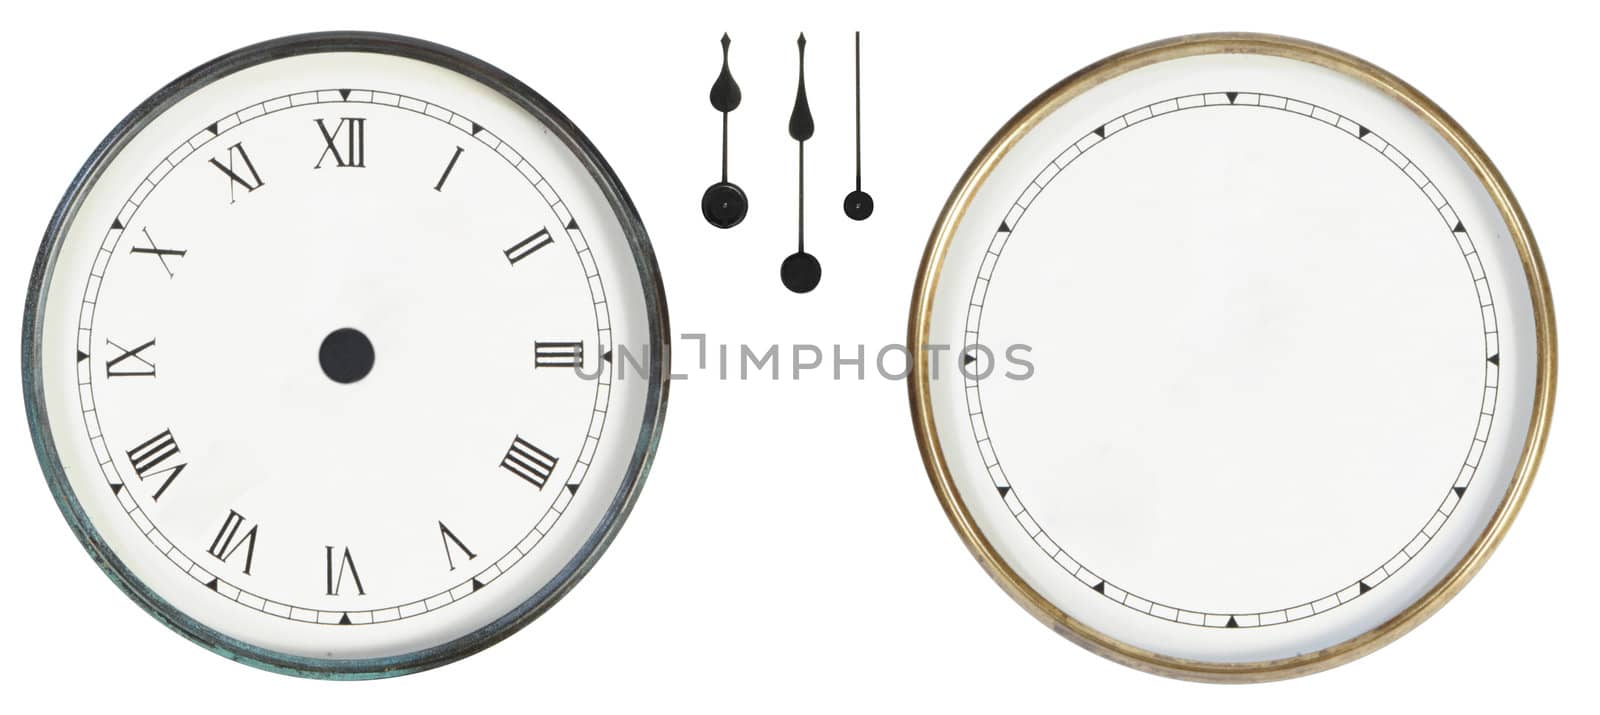  isolated classic clock by dyoma